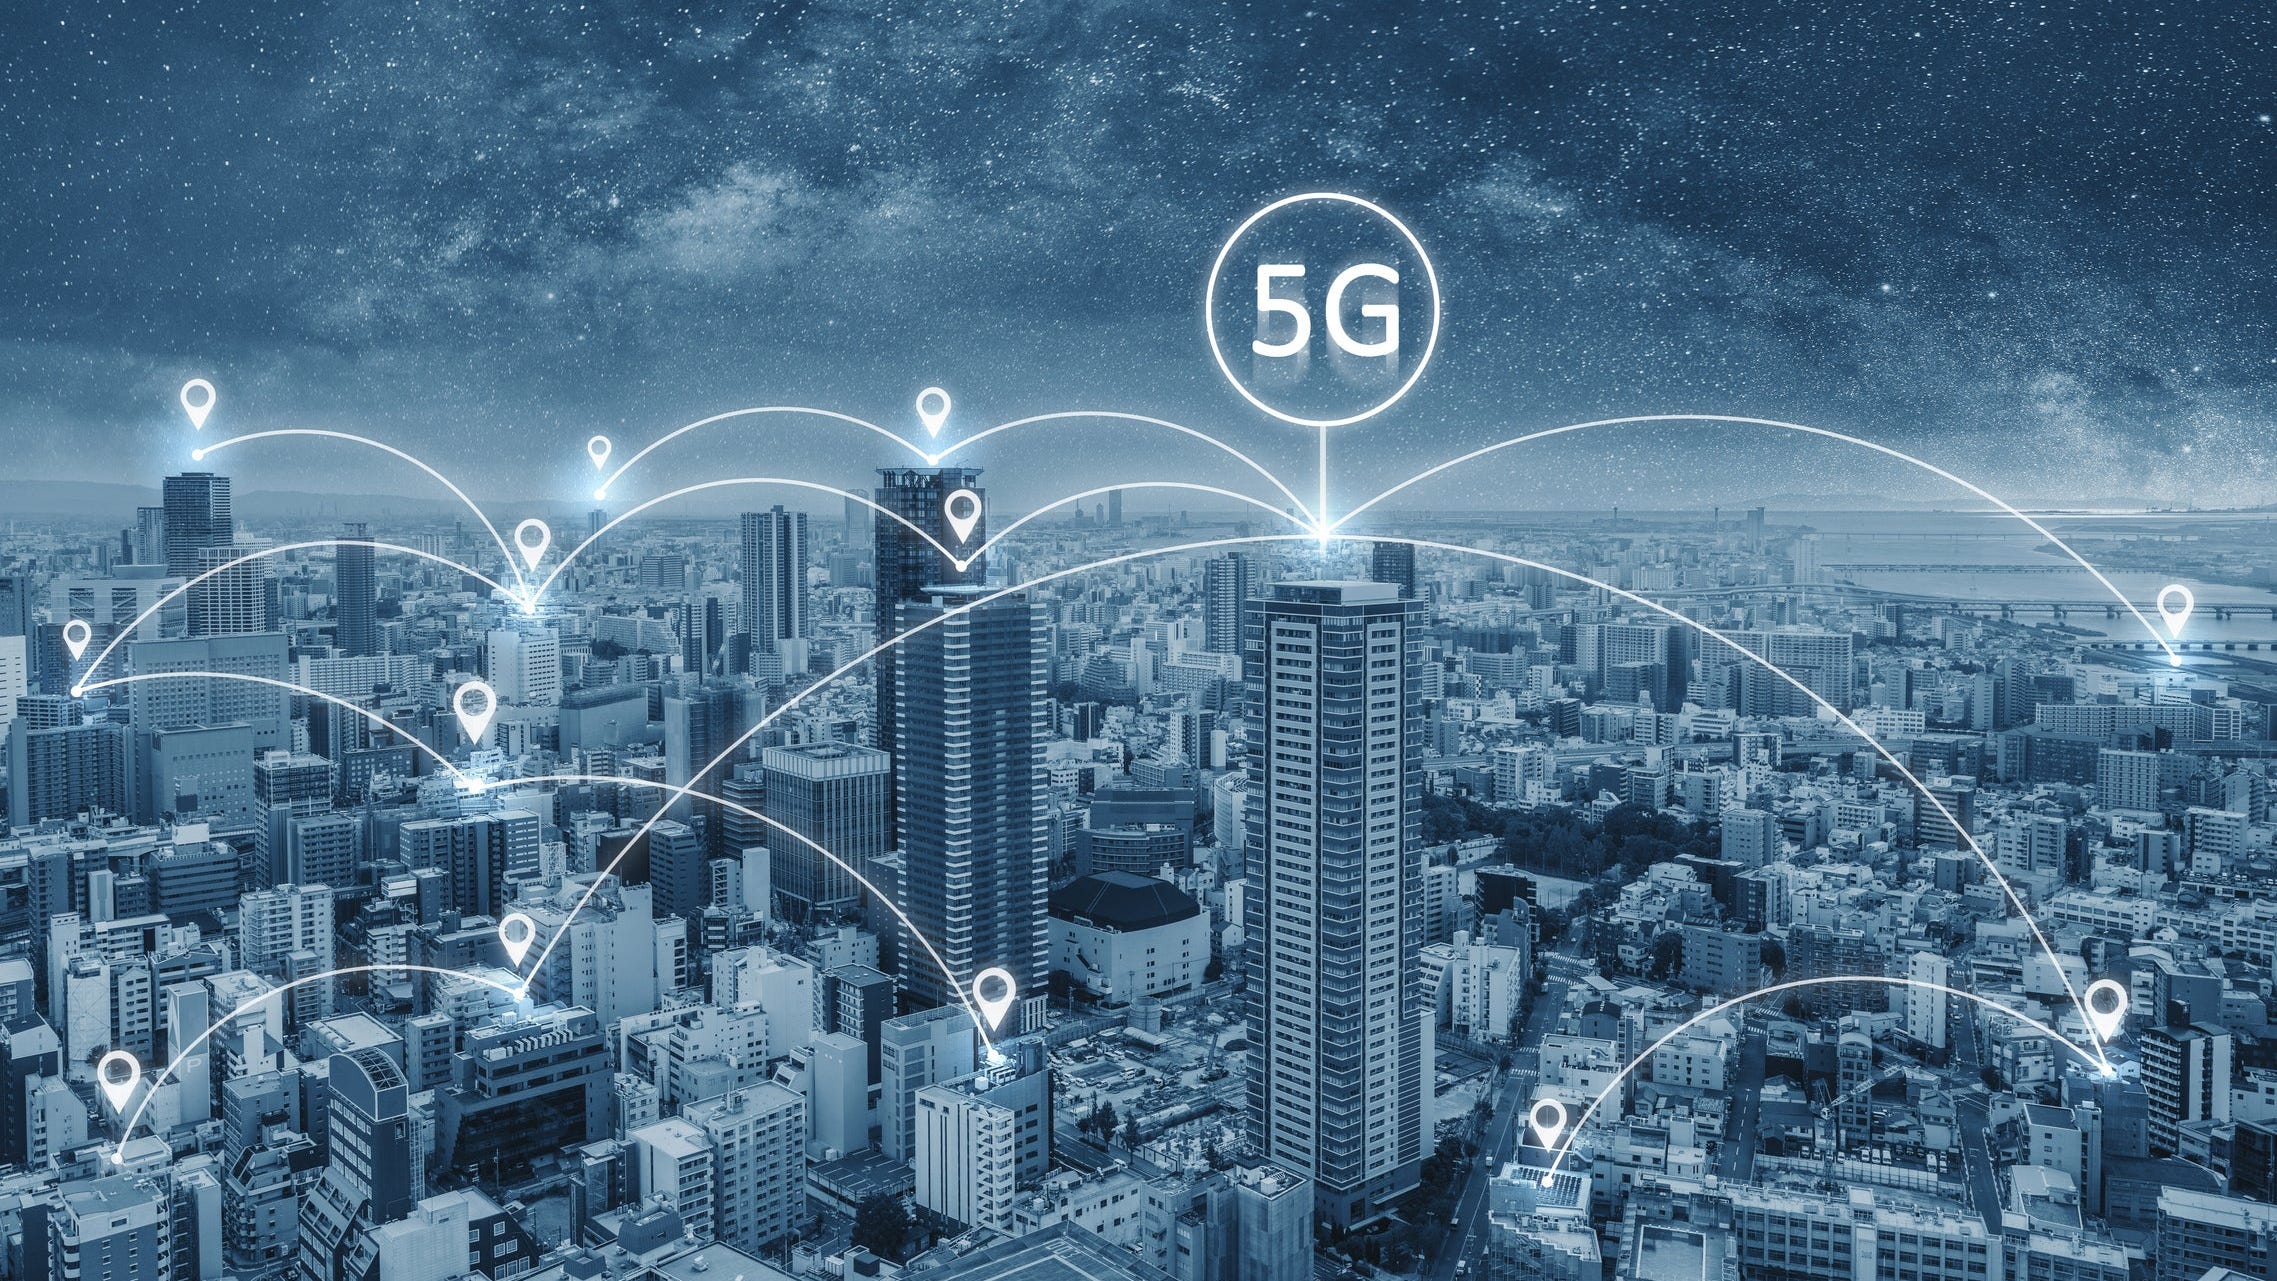 Coronavirus: Here's why science says 5G didn't cause COVID-19